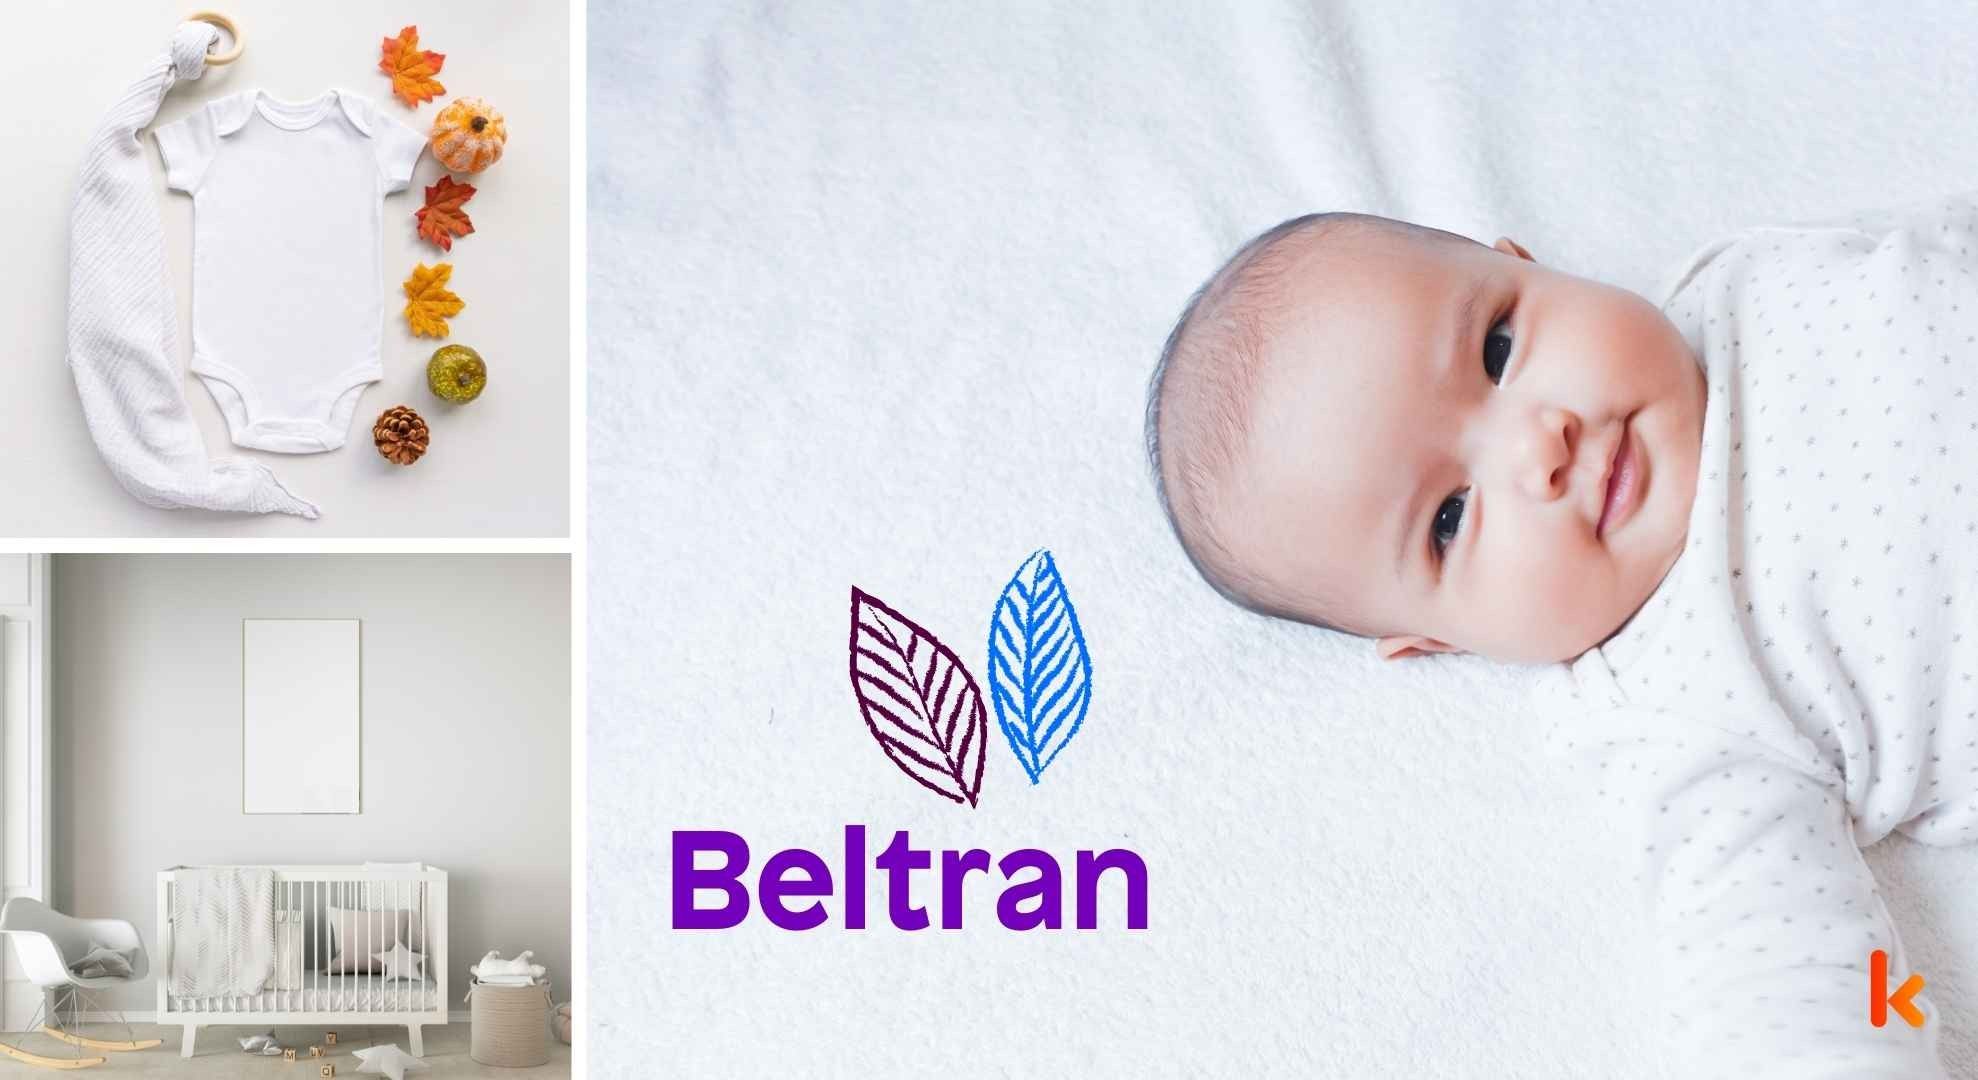 Meaning of the name Beltran